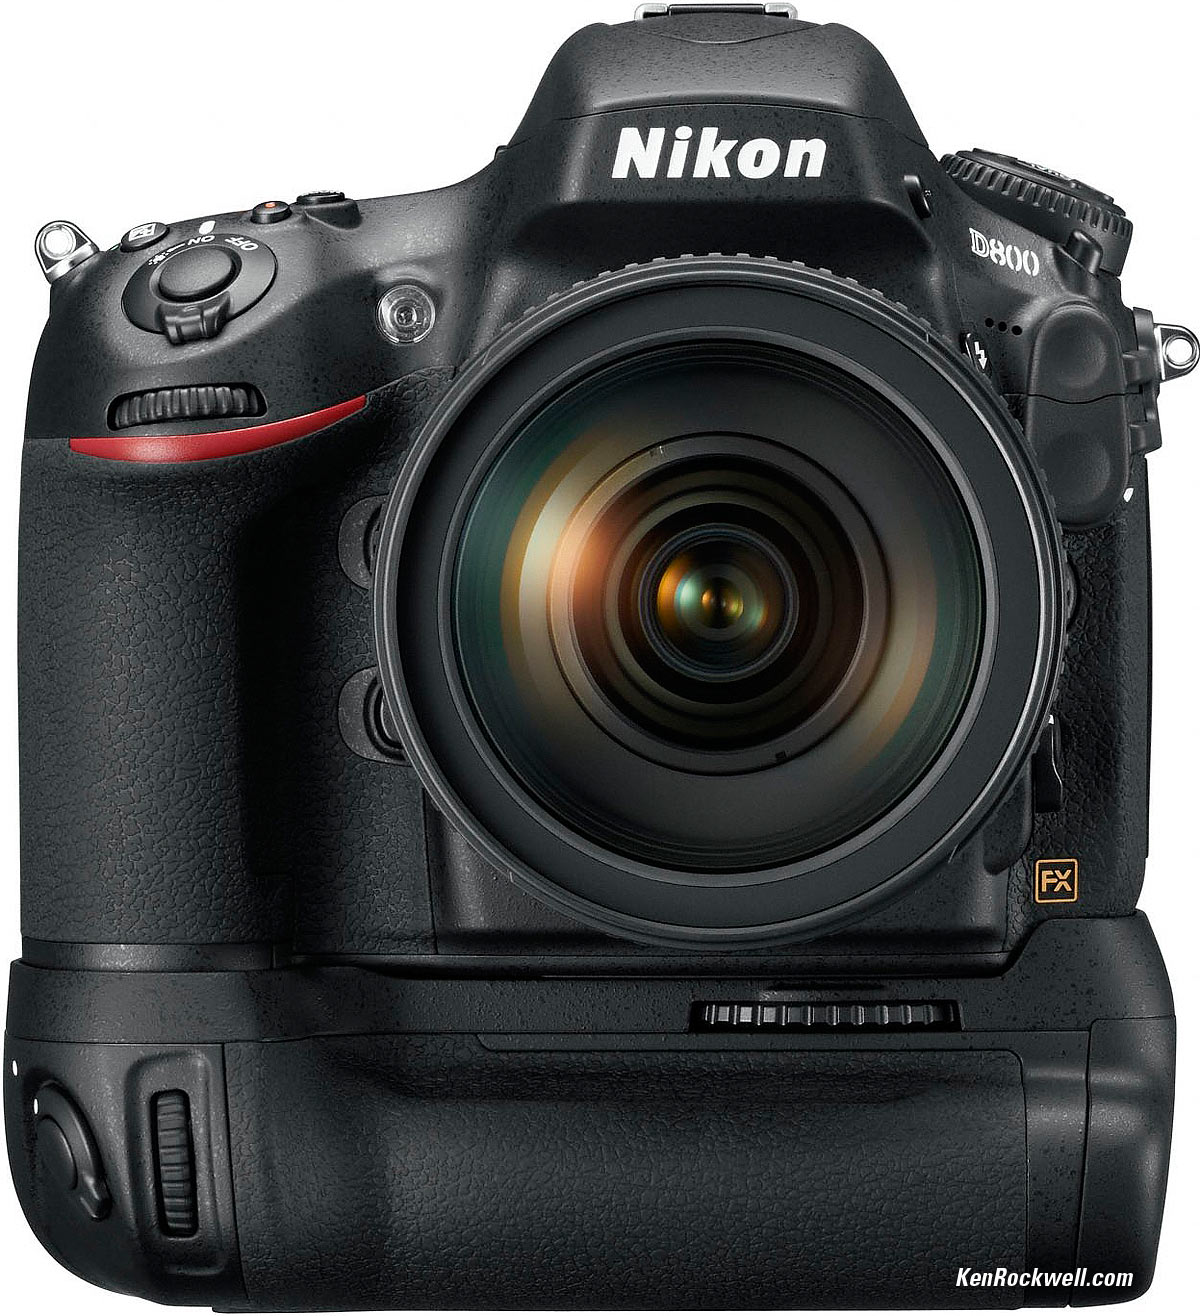 Nikon D810 Review & Sample Images by Ken Rockwell